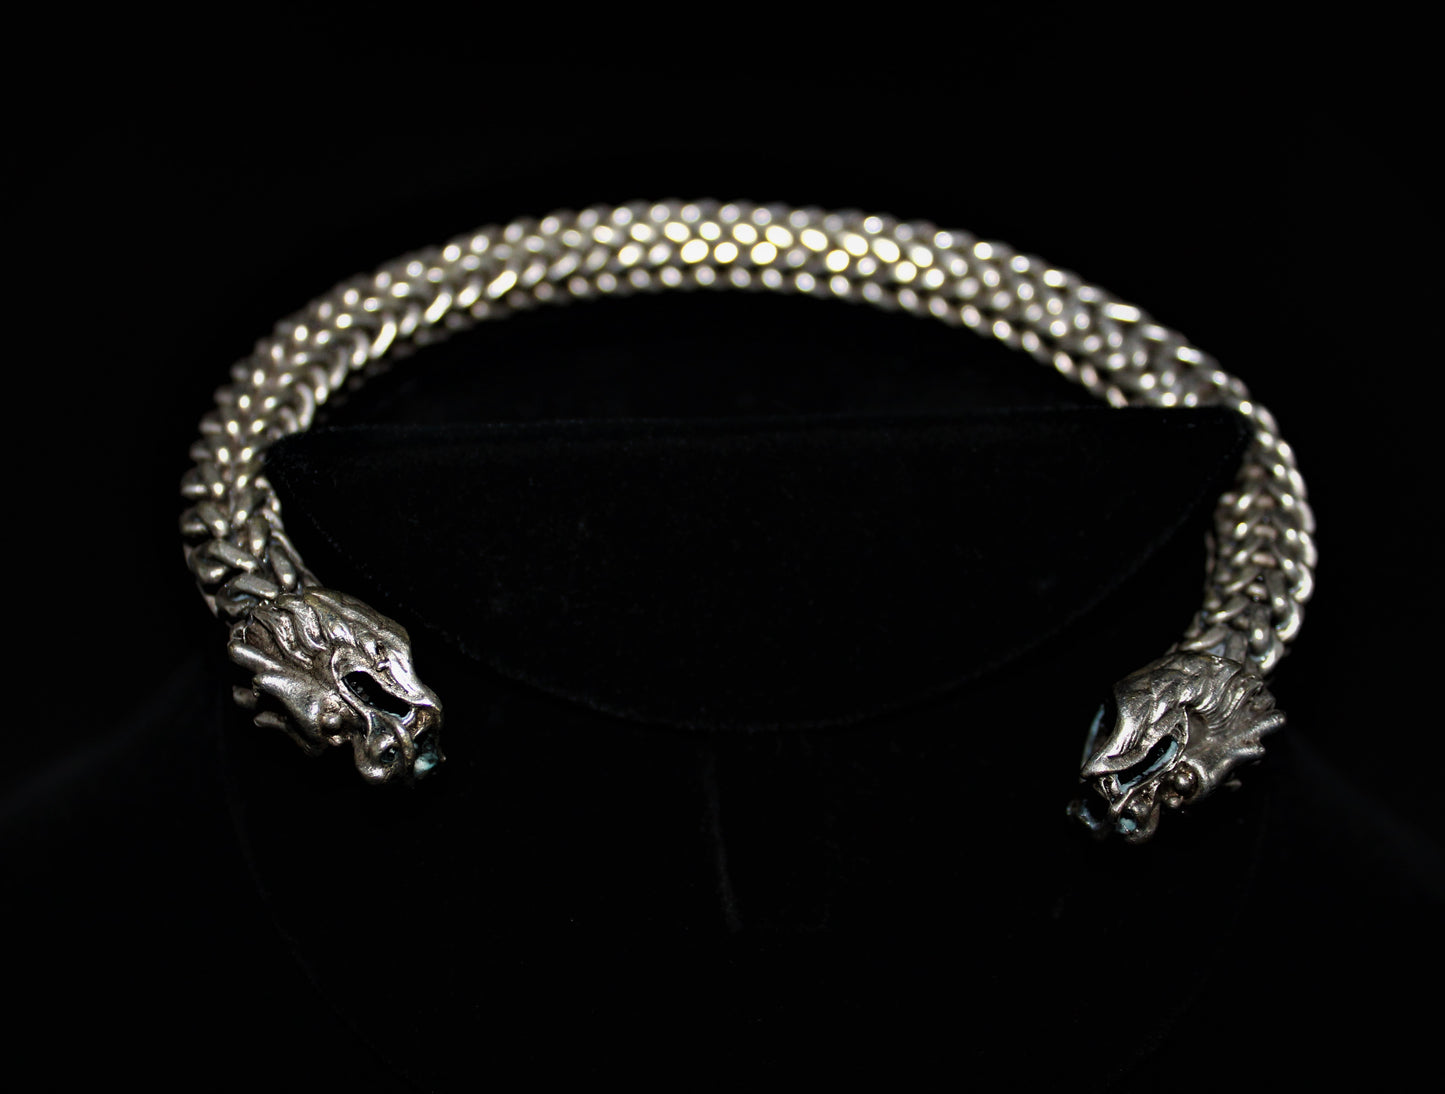 Handmade Heavy Woven Mexican Sterling Silver Bracelet with Dragons - 9